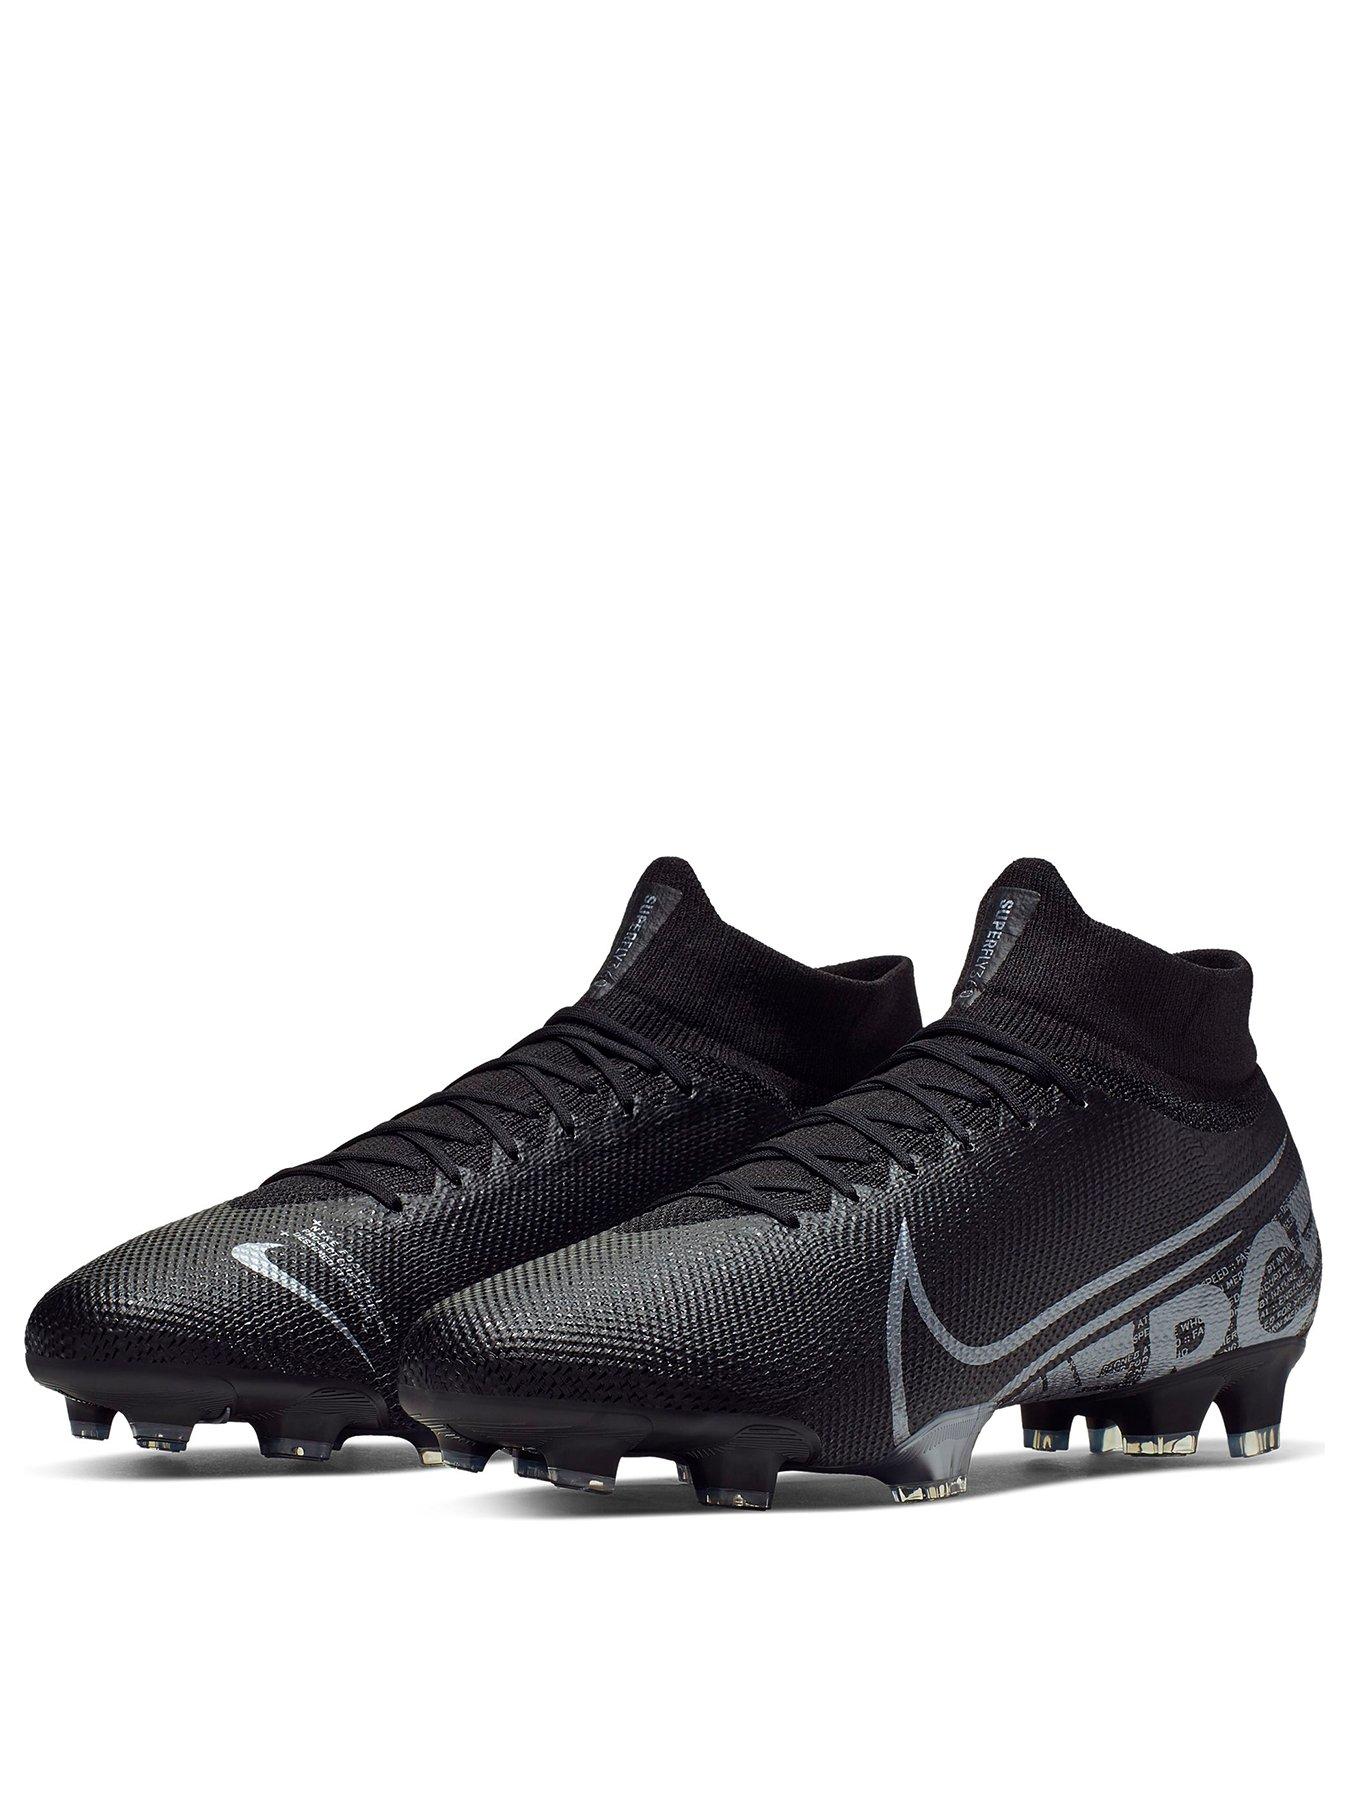 Nike Mercurial Superfly 7 Pro FG Firm Ground Soccer.